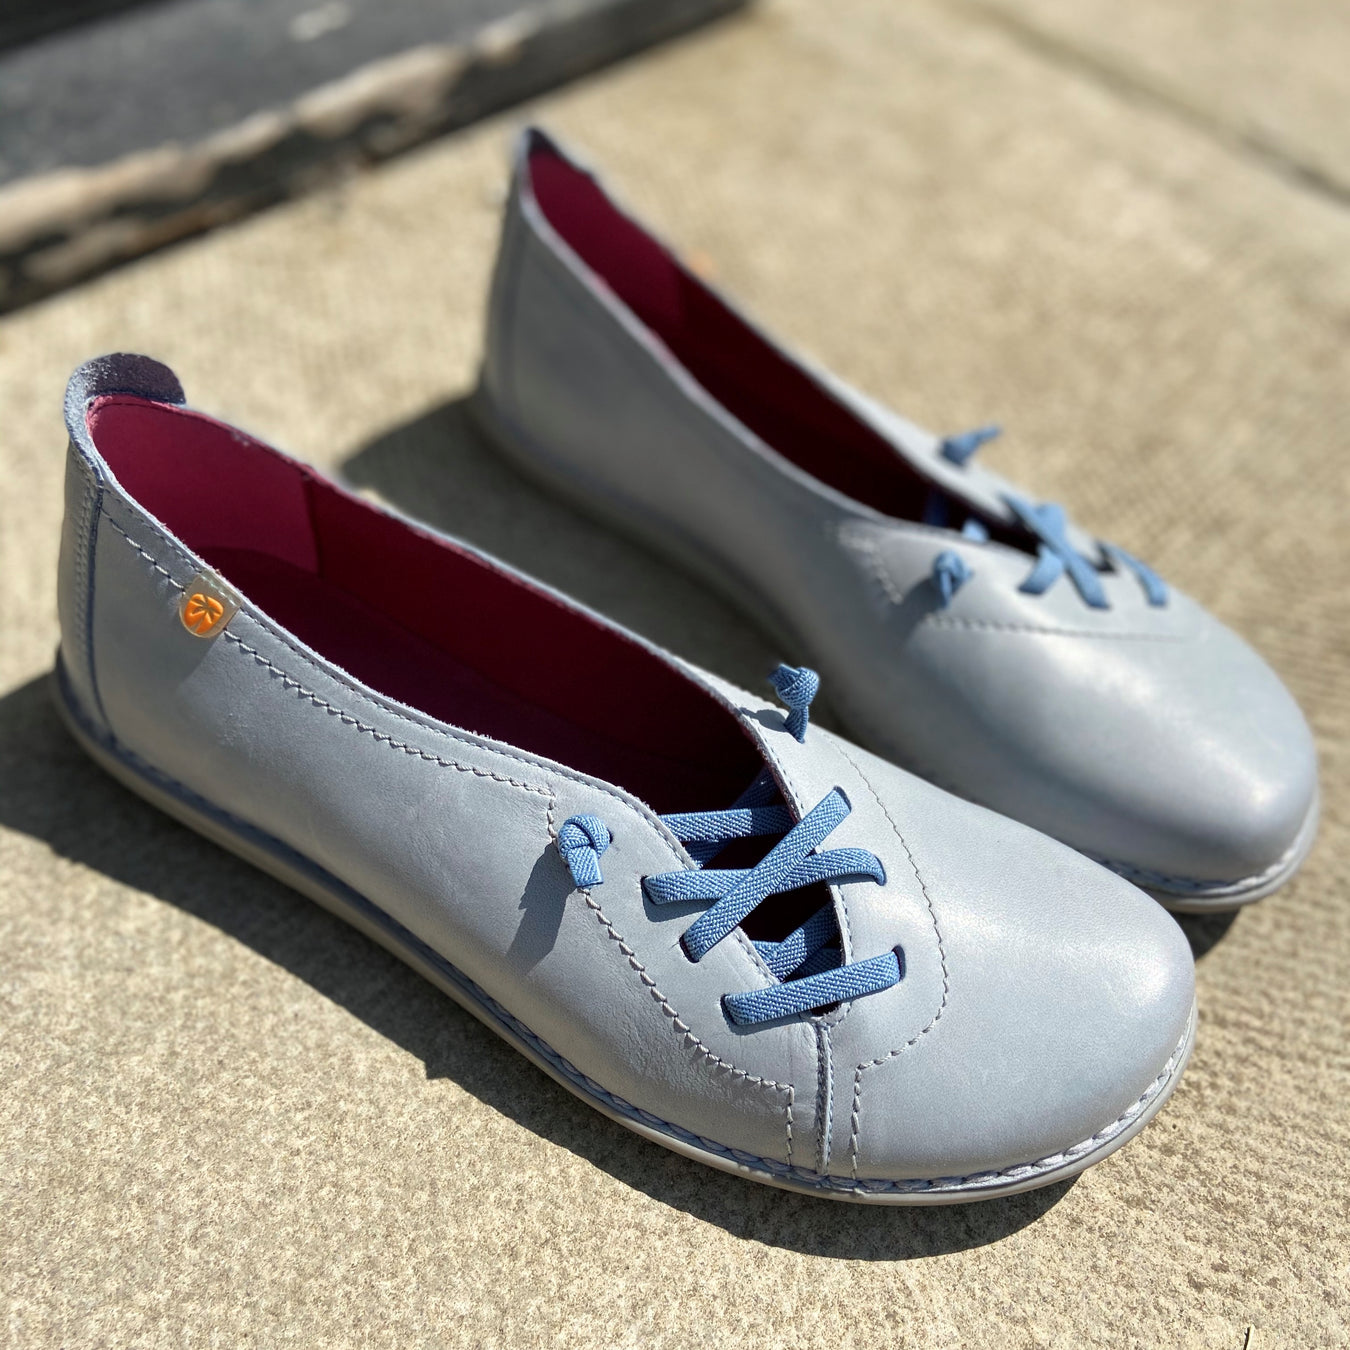 jungla leather ladies shoes in white and blue laces 